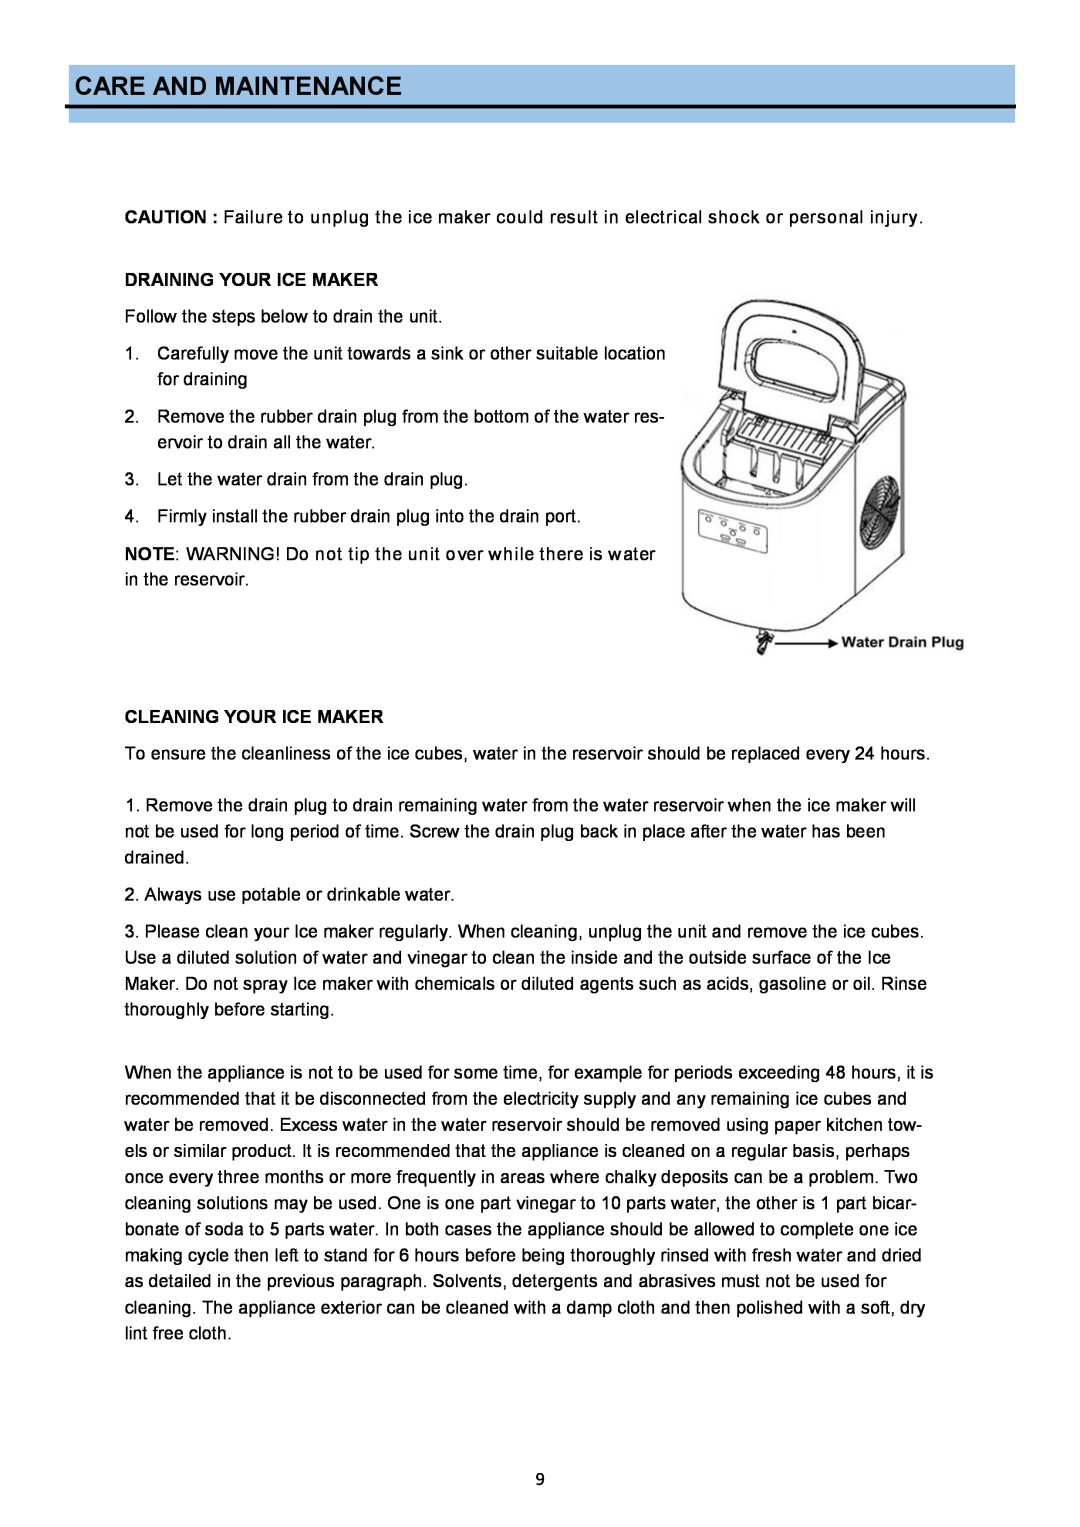 Whynter IMC-270MS instruction manual Care And Maintenance, Draining Your Ice Maker, Cleaning Your Ice Maker 